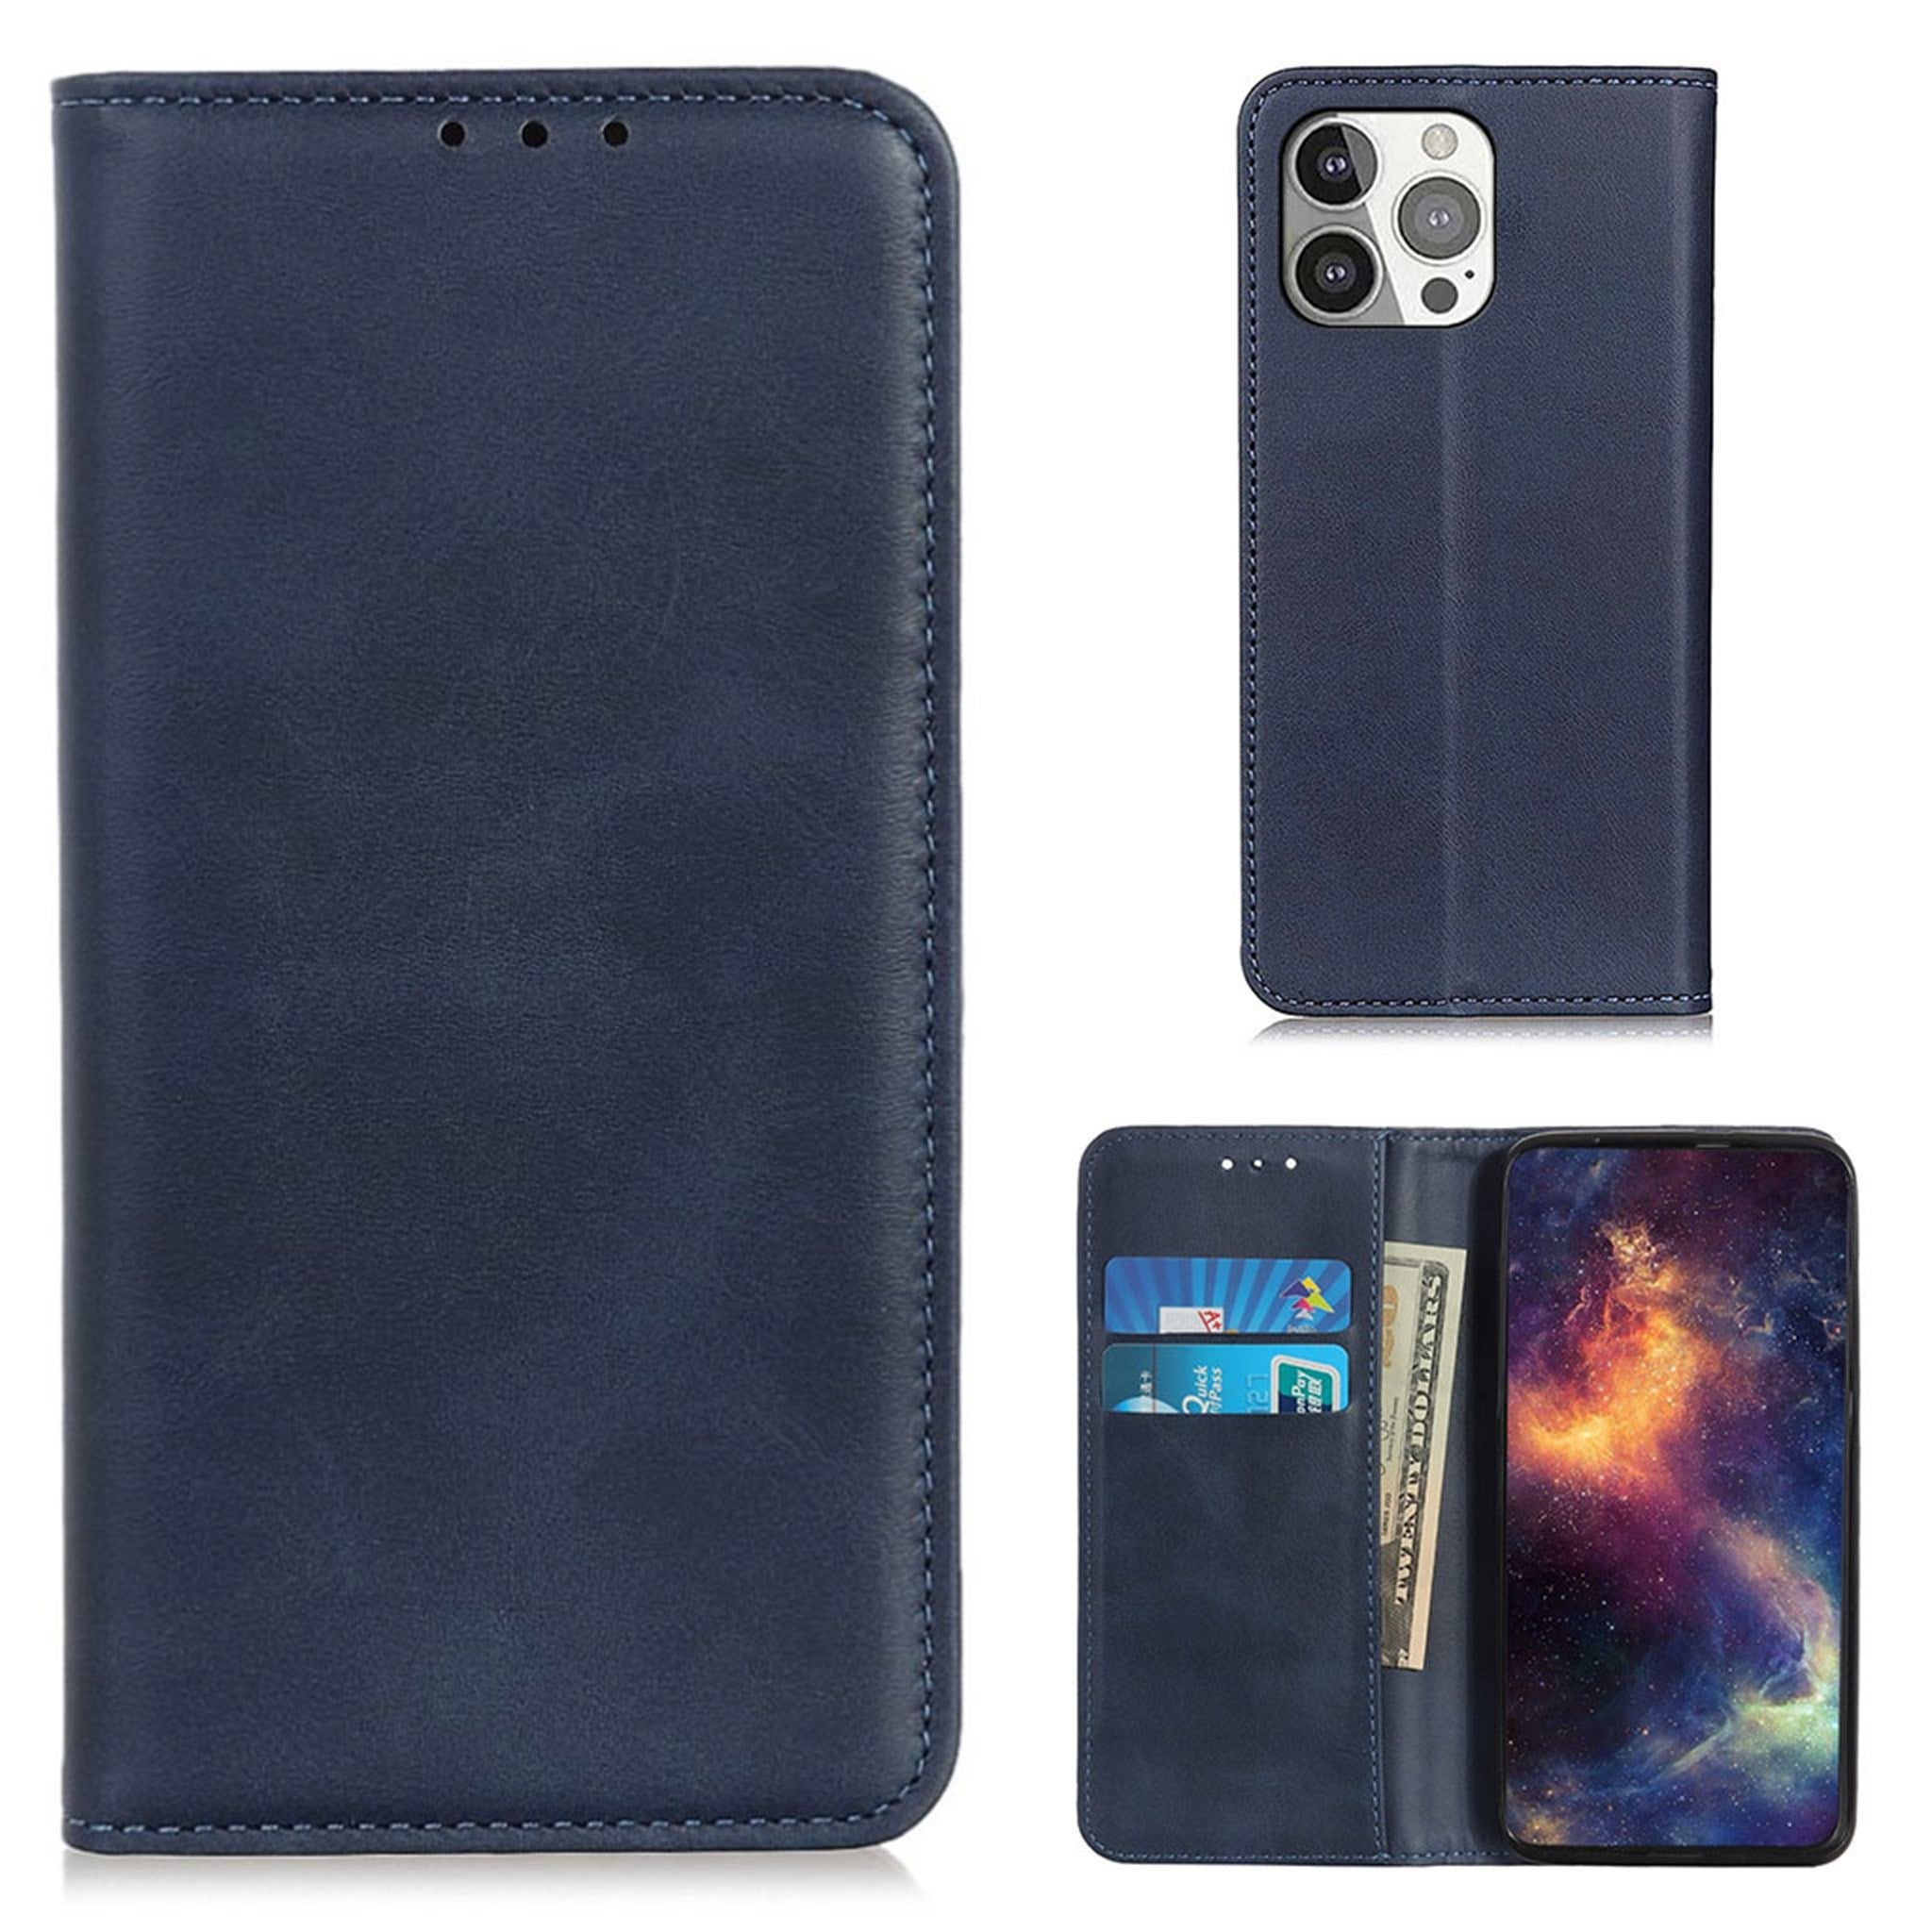 Wallet-style genuine leather flipcase for iPhone 13 Pro - Blue